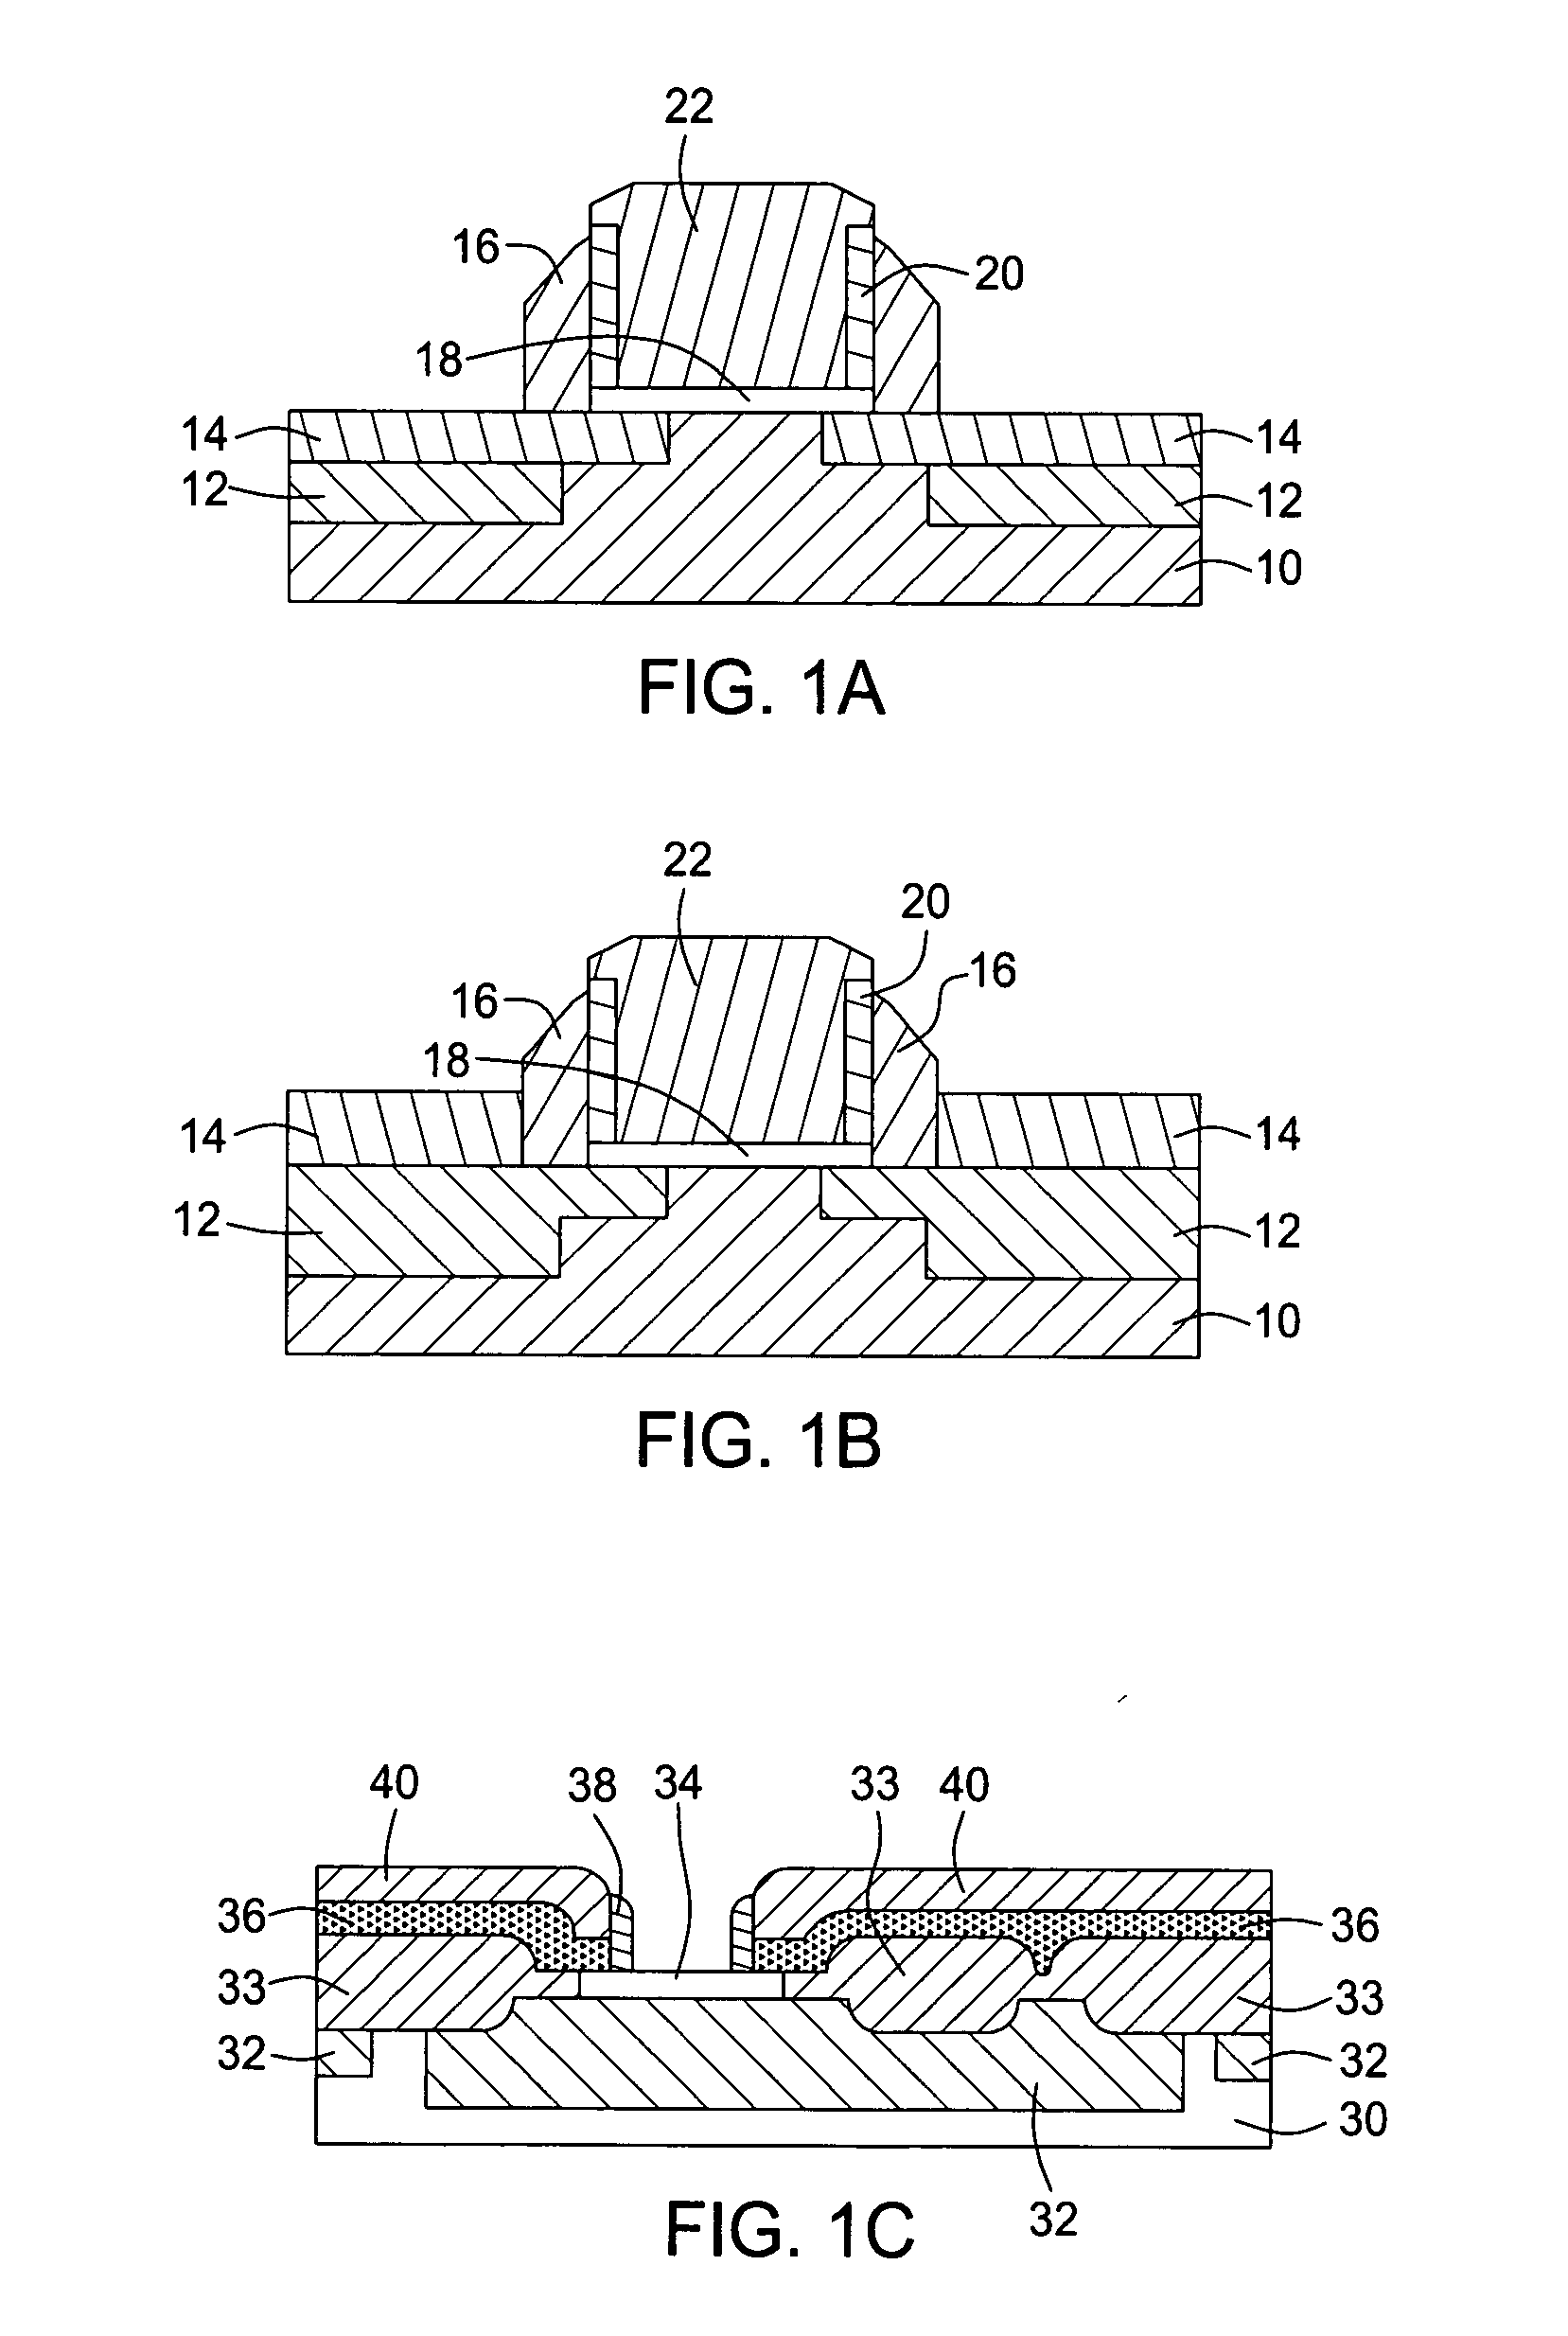 Methods of selective deposition of heavily doped epitaxial SiGe